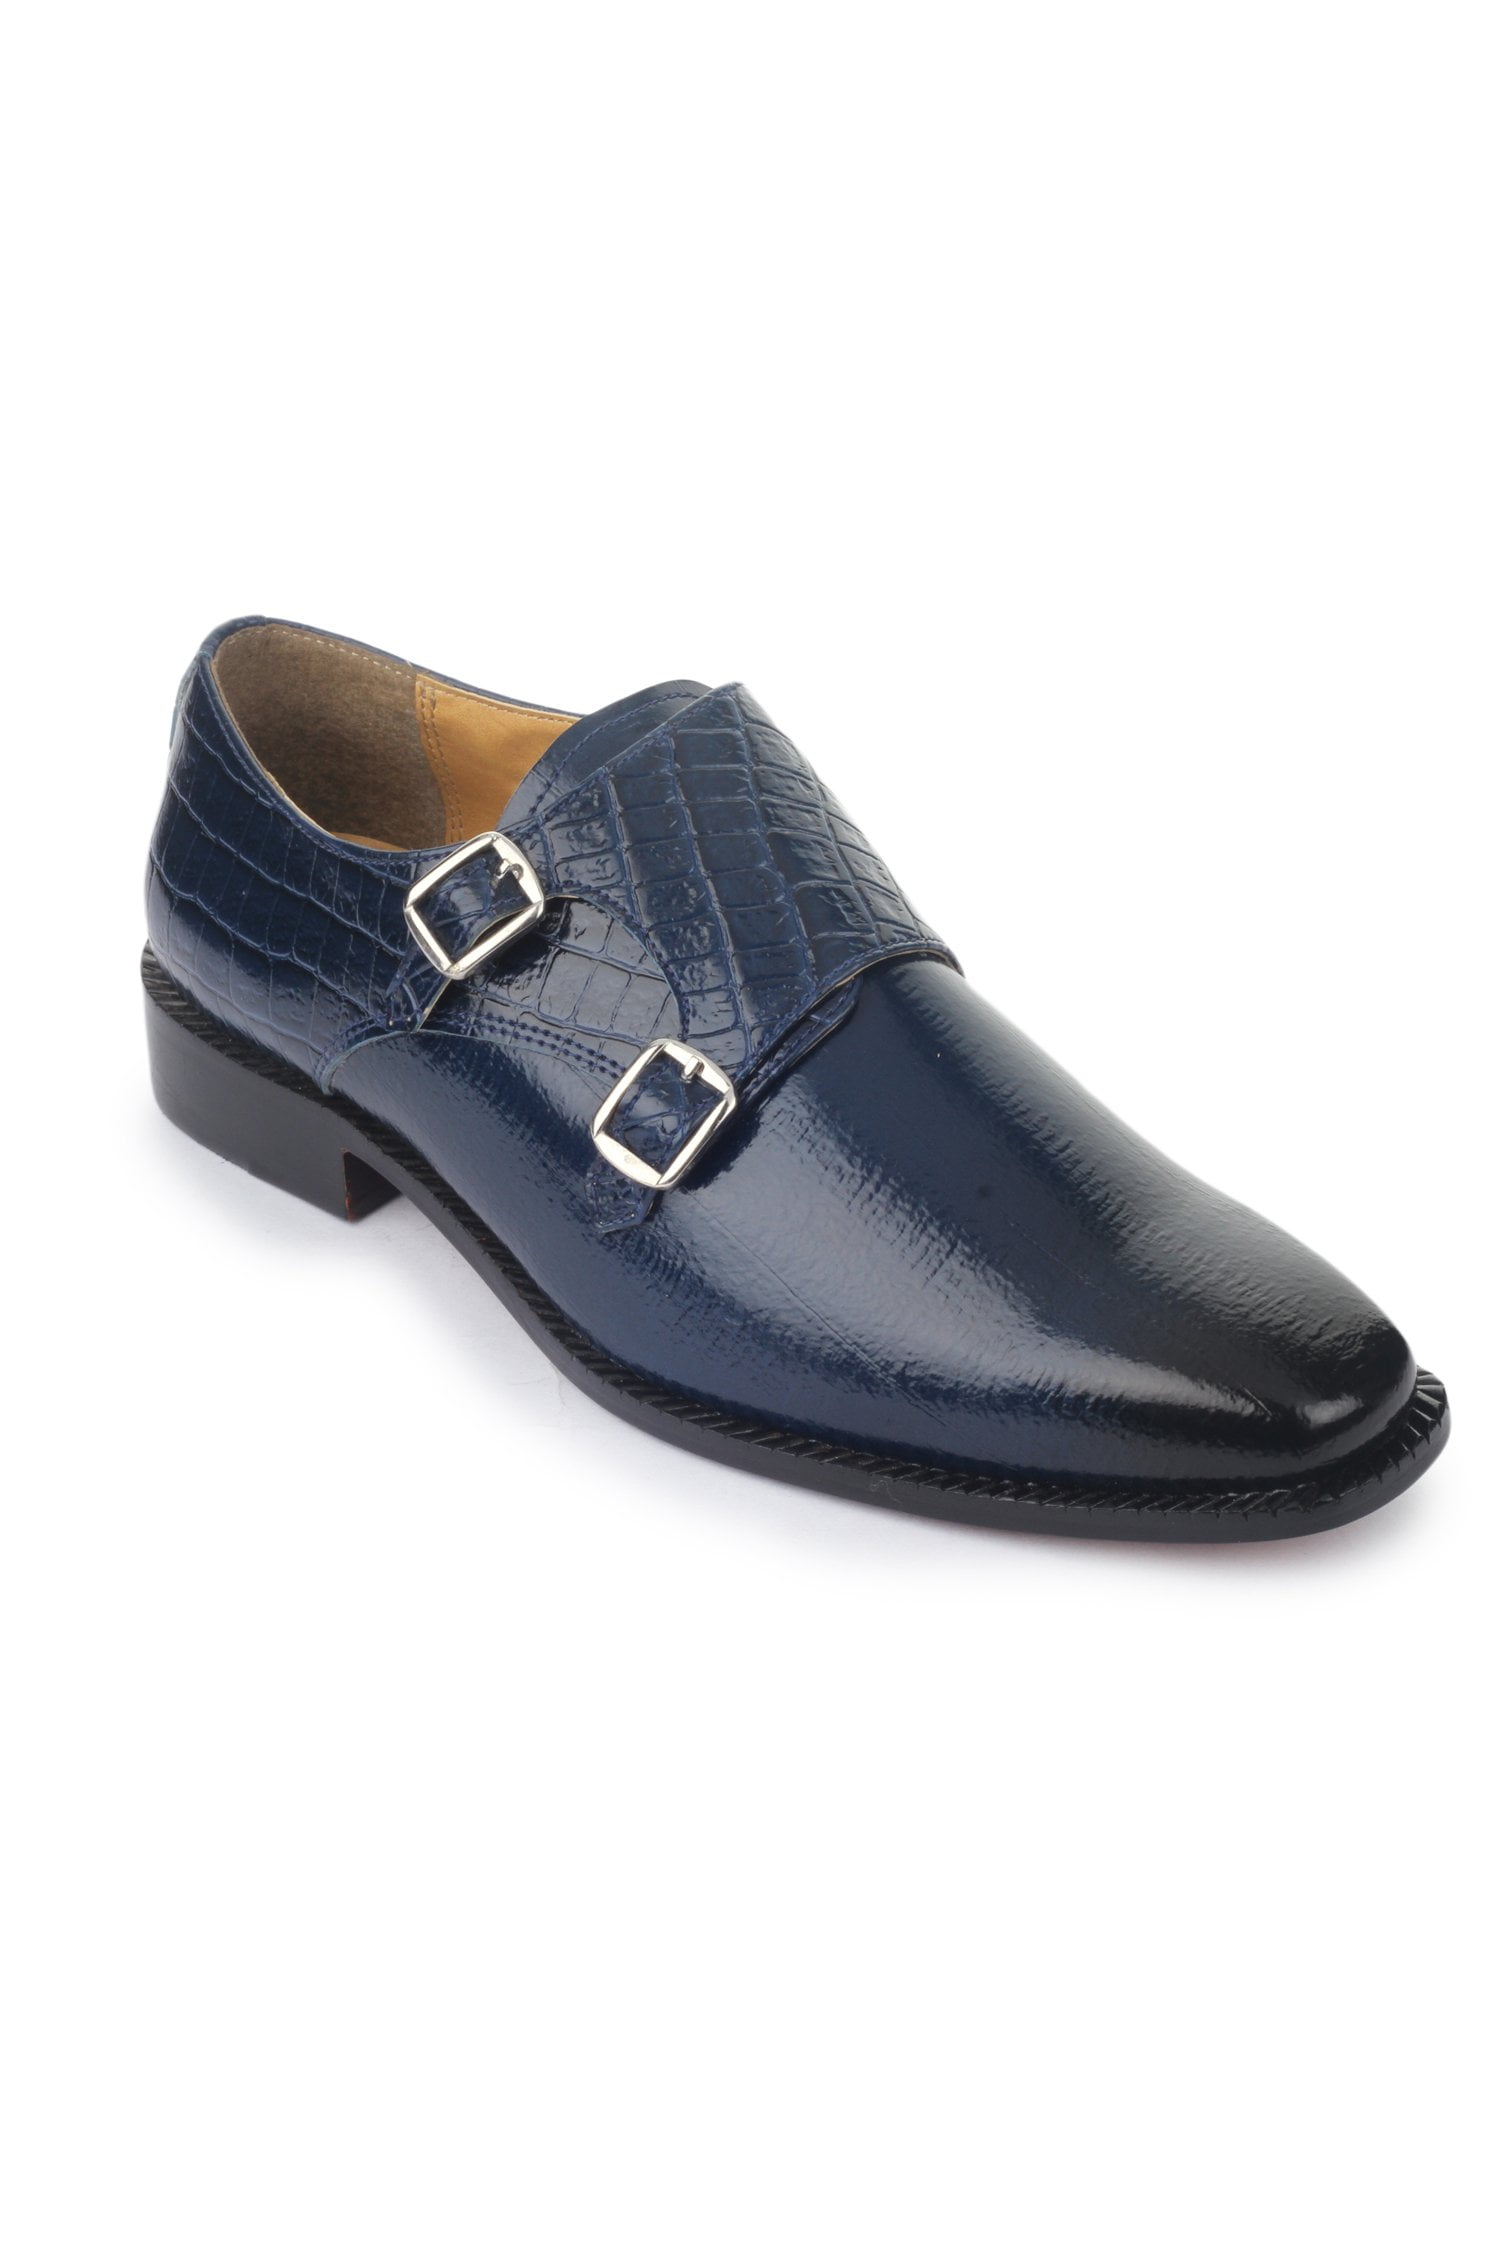 liberty leather loafers